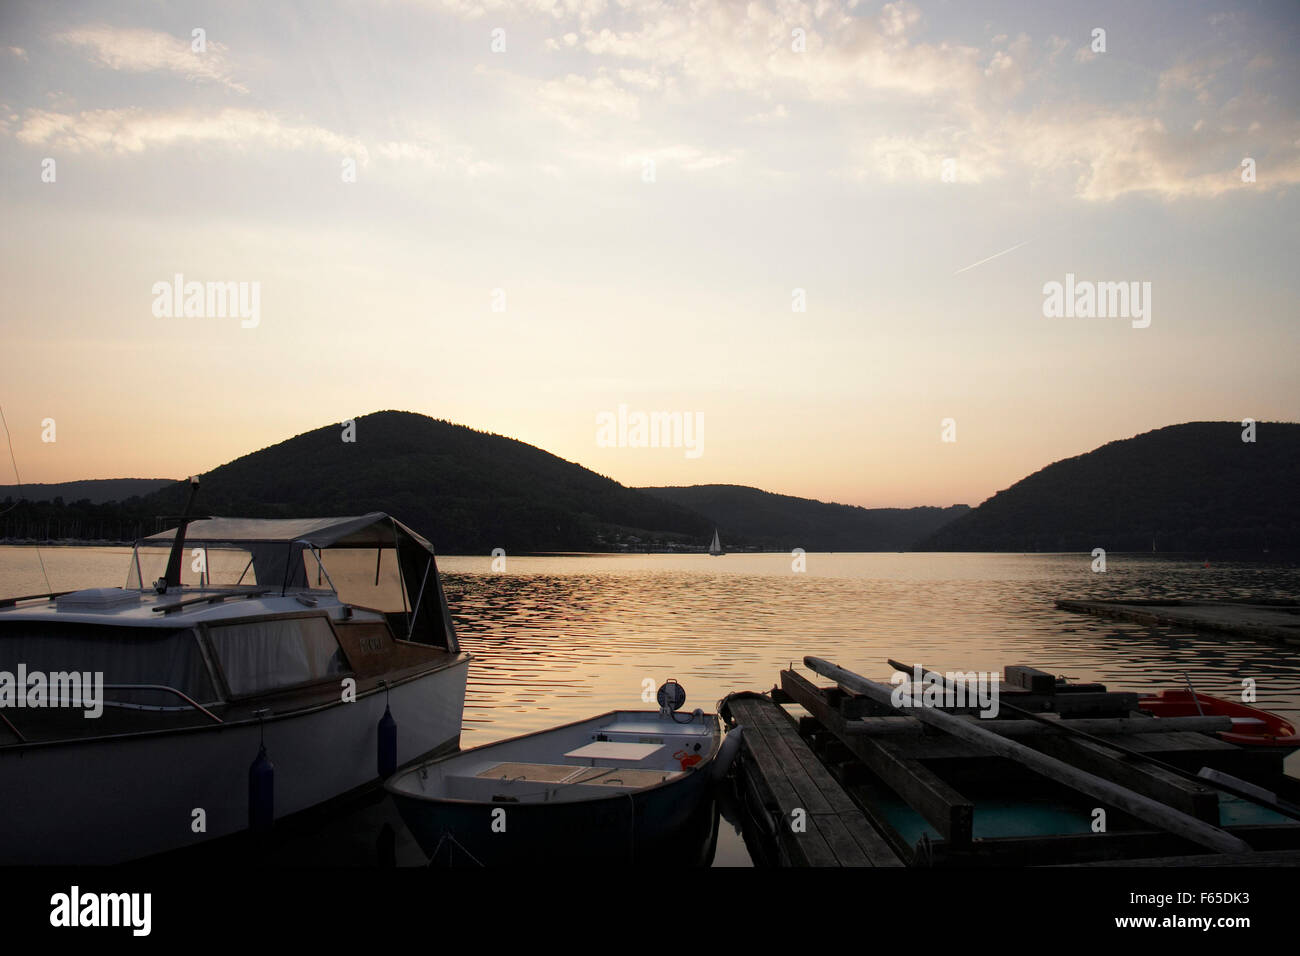 View of harbour in National park Kellerwald-Edersee at sunset, Hesse, Germany Stock Photo